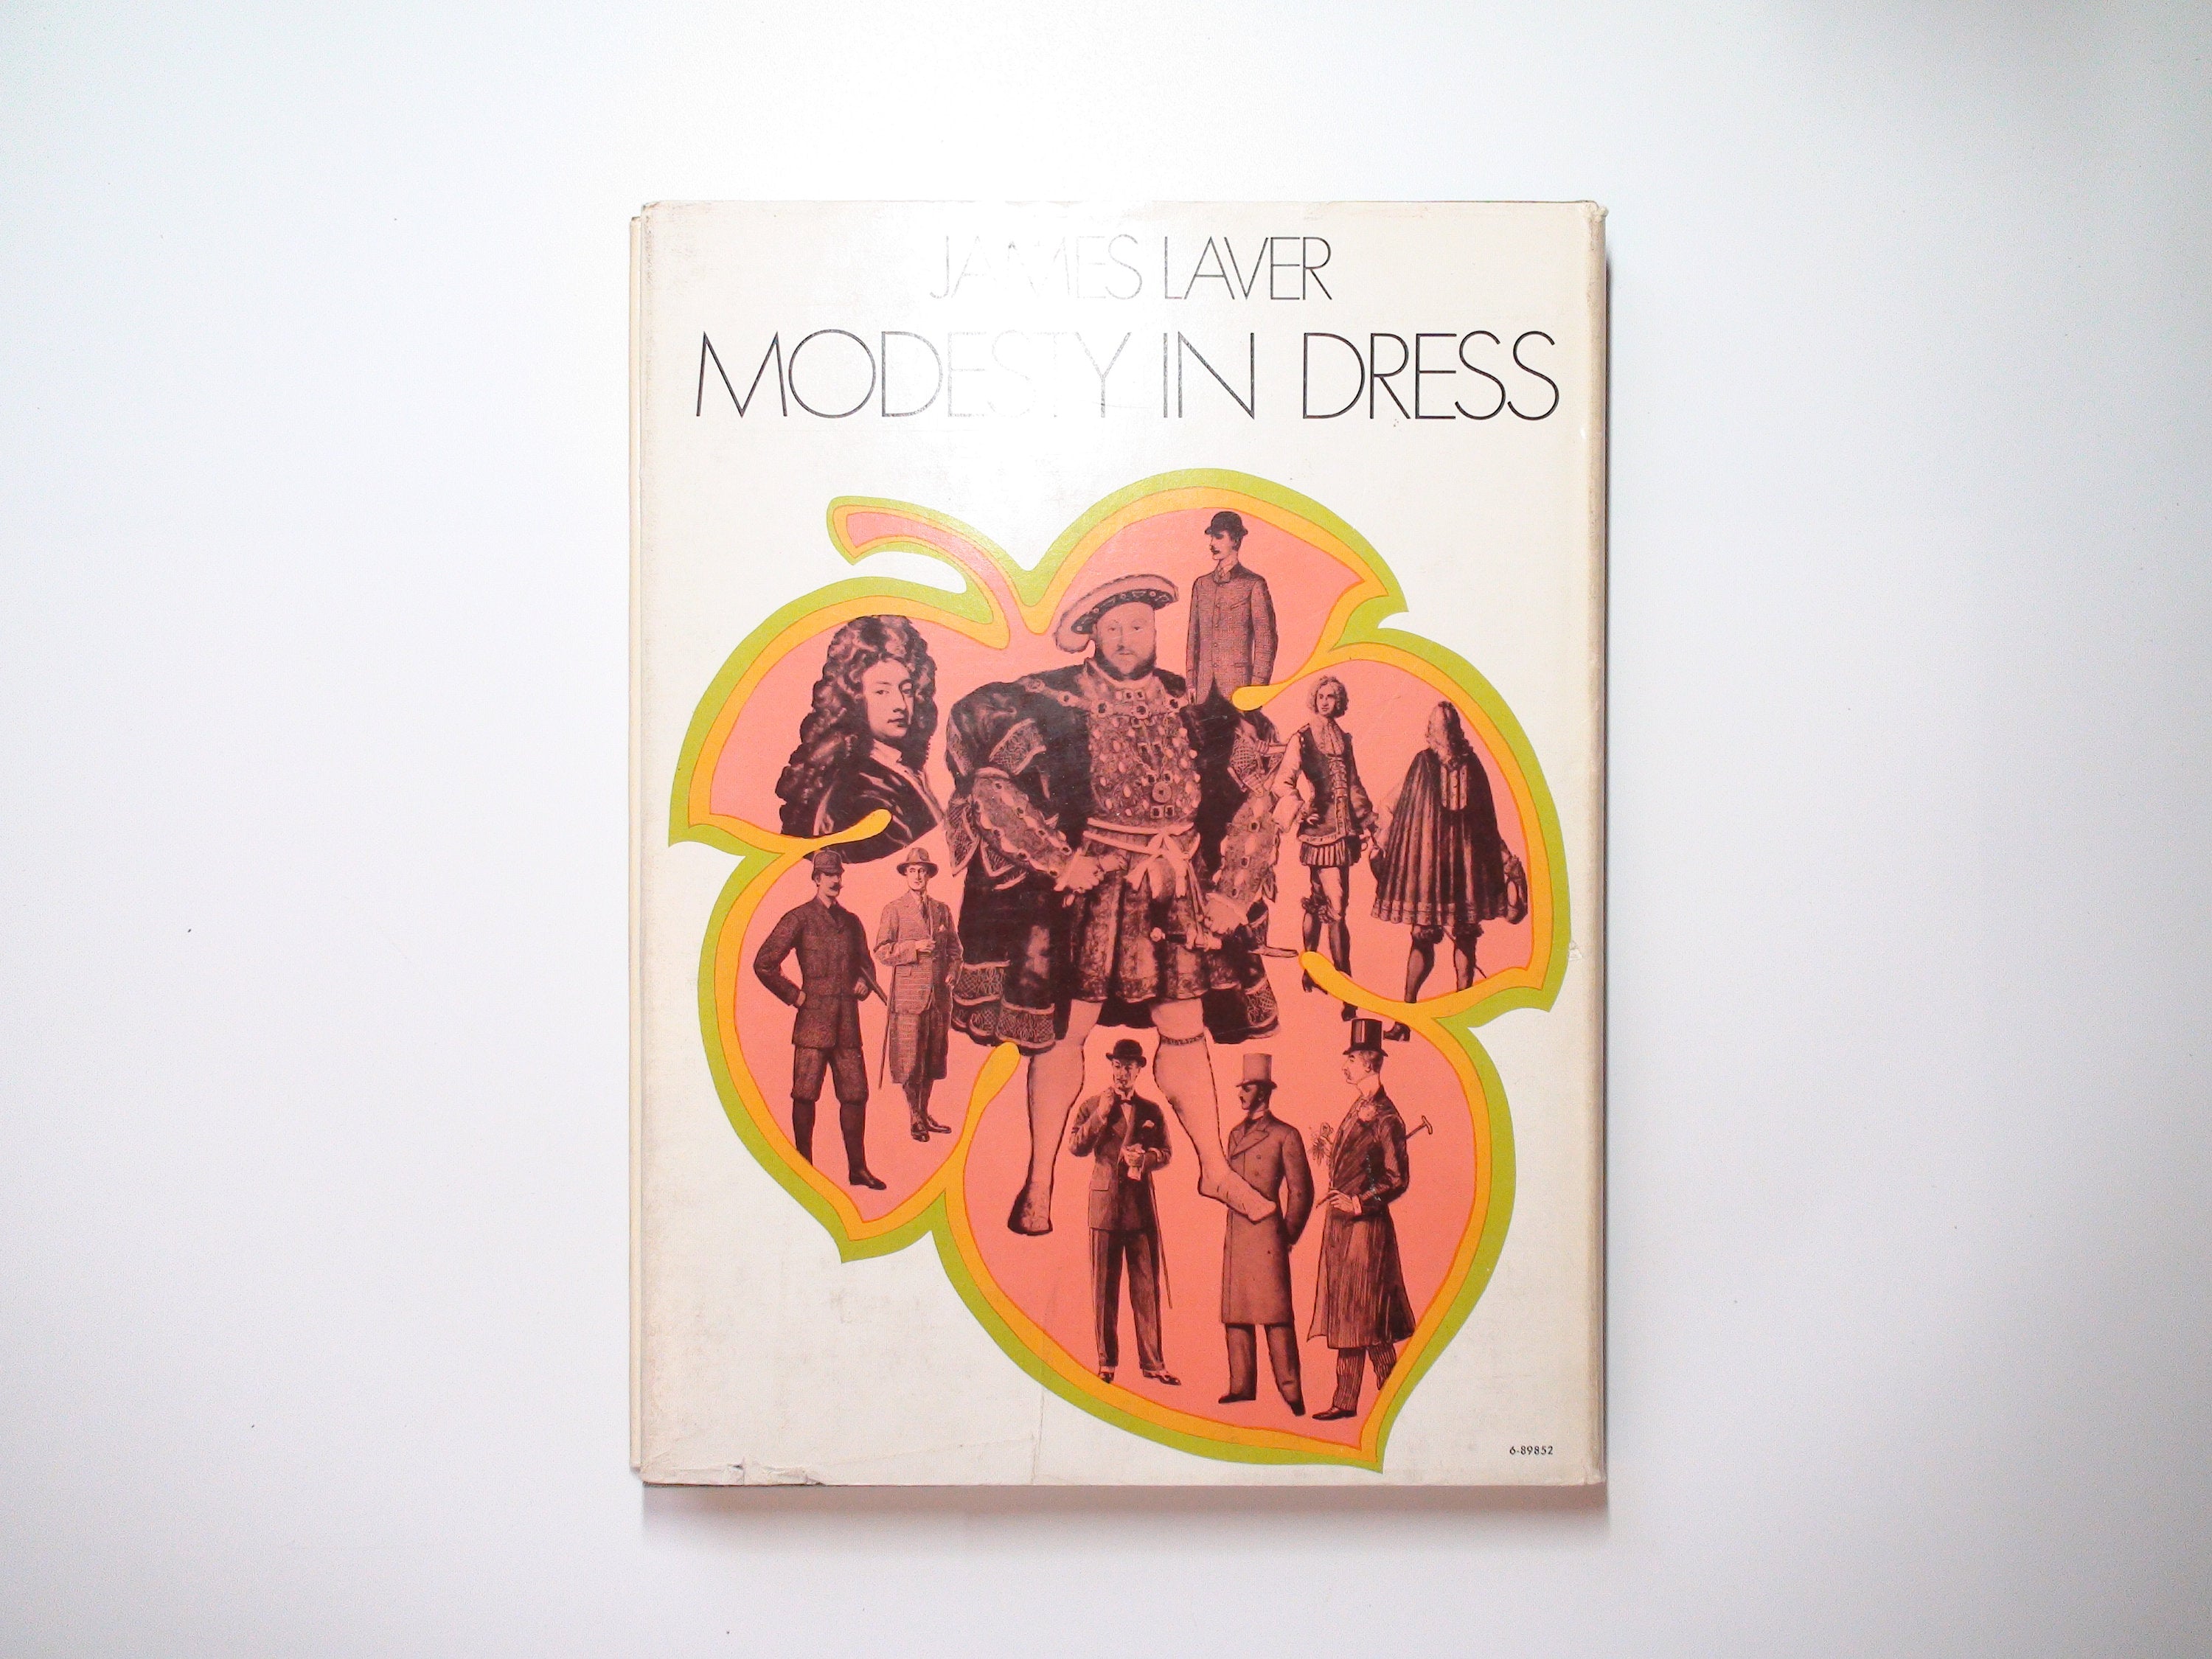 Modesty in Dress by James Laver, Illustrated, 1st Ed, 1st Printing, 1969